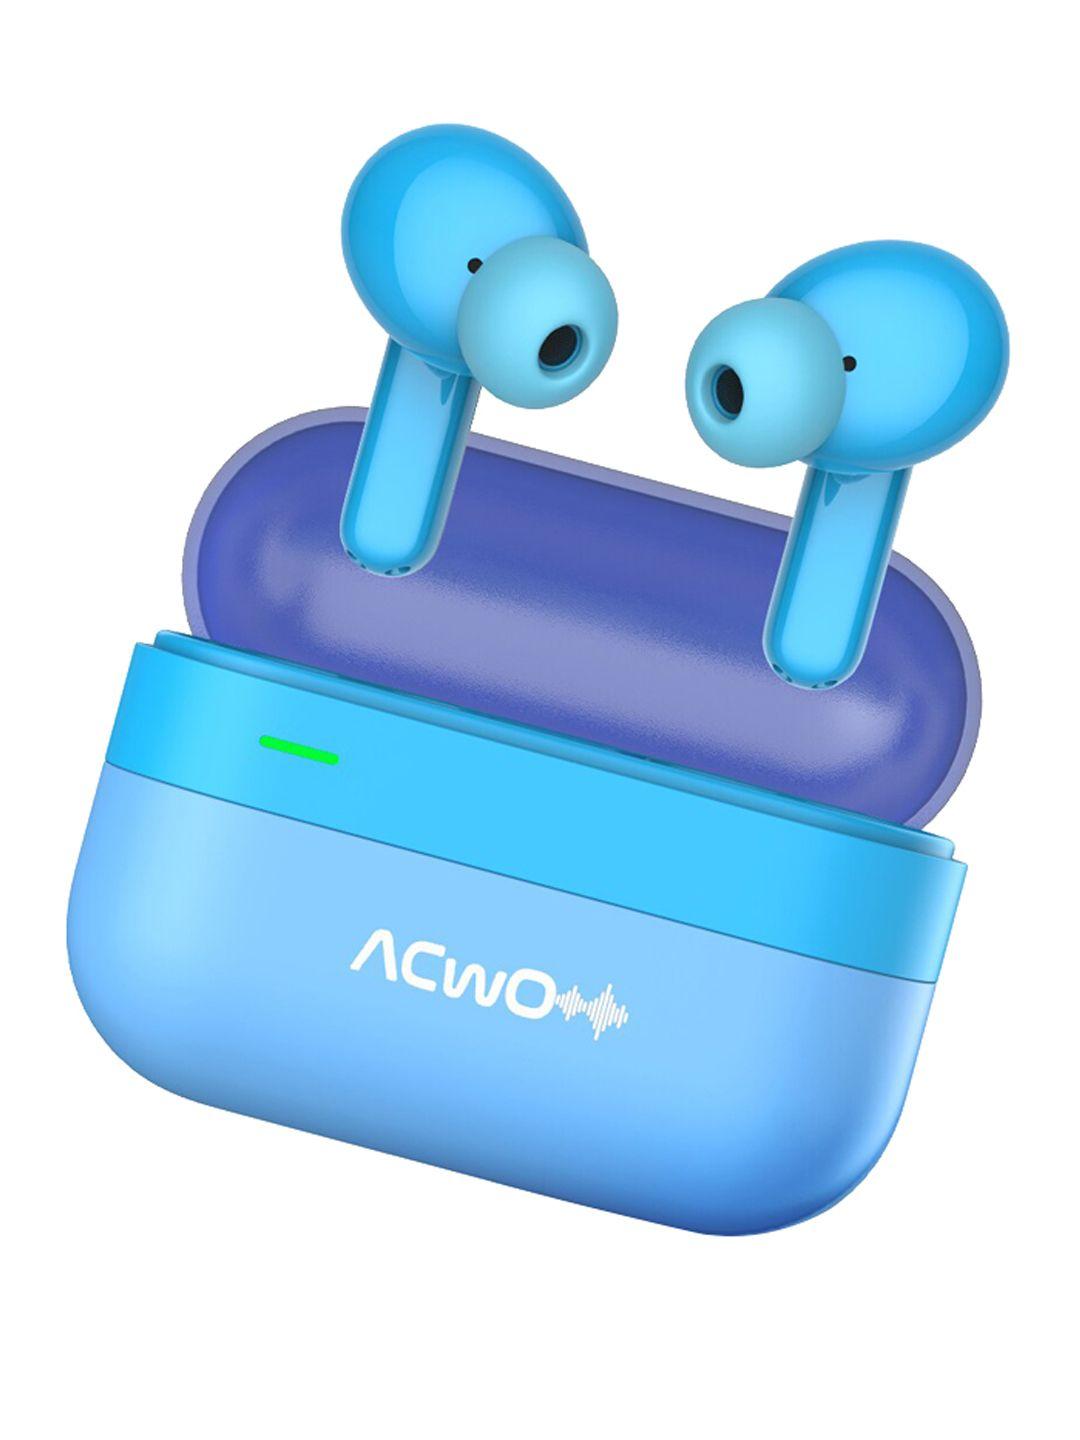 acwo dwots 424 truly wireless earbuds 50 hrs playtime with quad mic enc & gaming mode